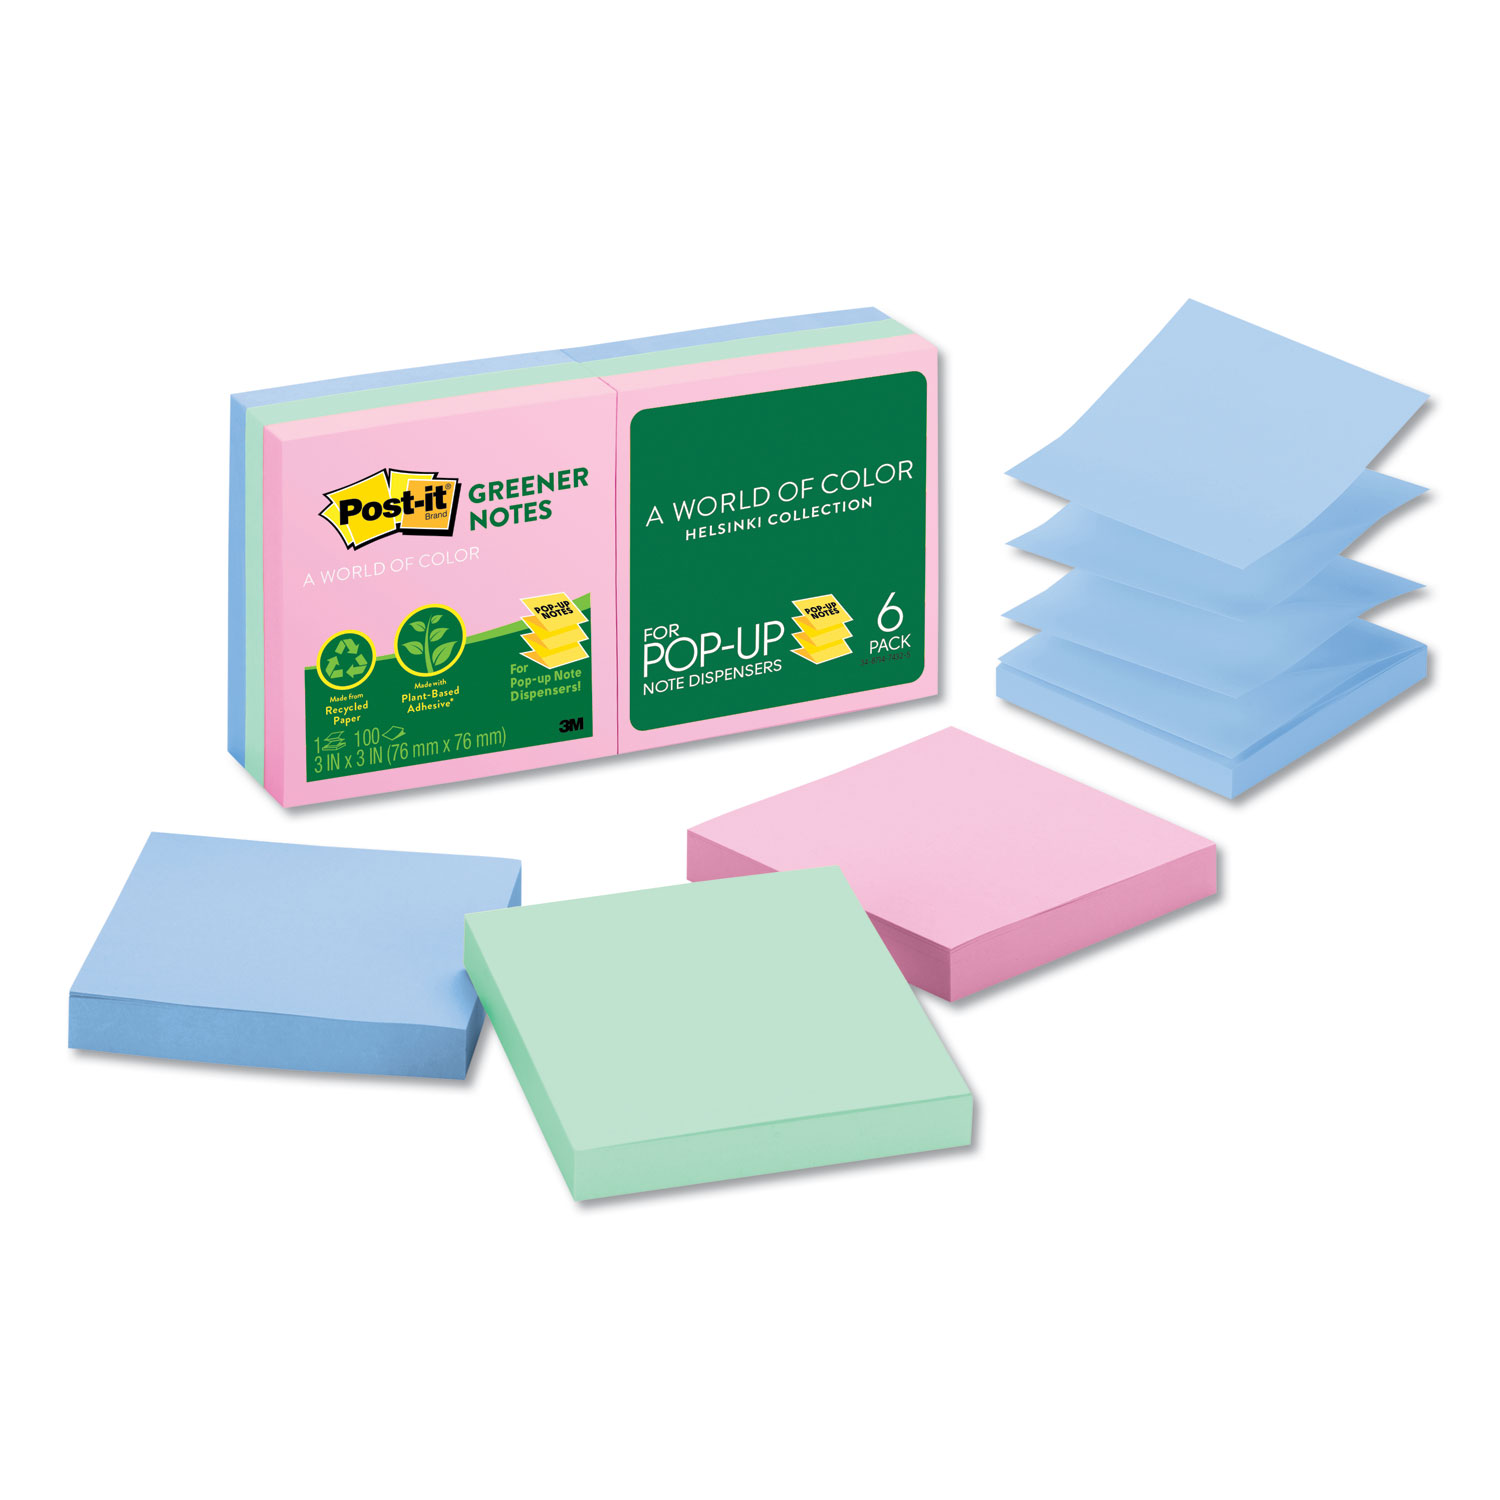  Post-it Greener Notes R330RP-6AP Recycled Pop-up Notes, 3 x 3, Assorted Helsinki Colors, 100-Sheet, 6/Pack (MMMR330RP6AP) 